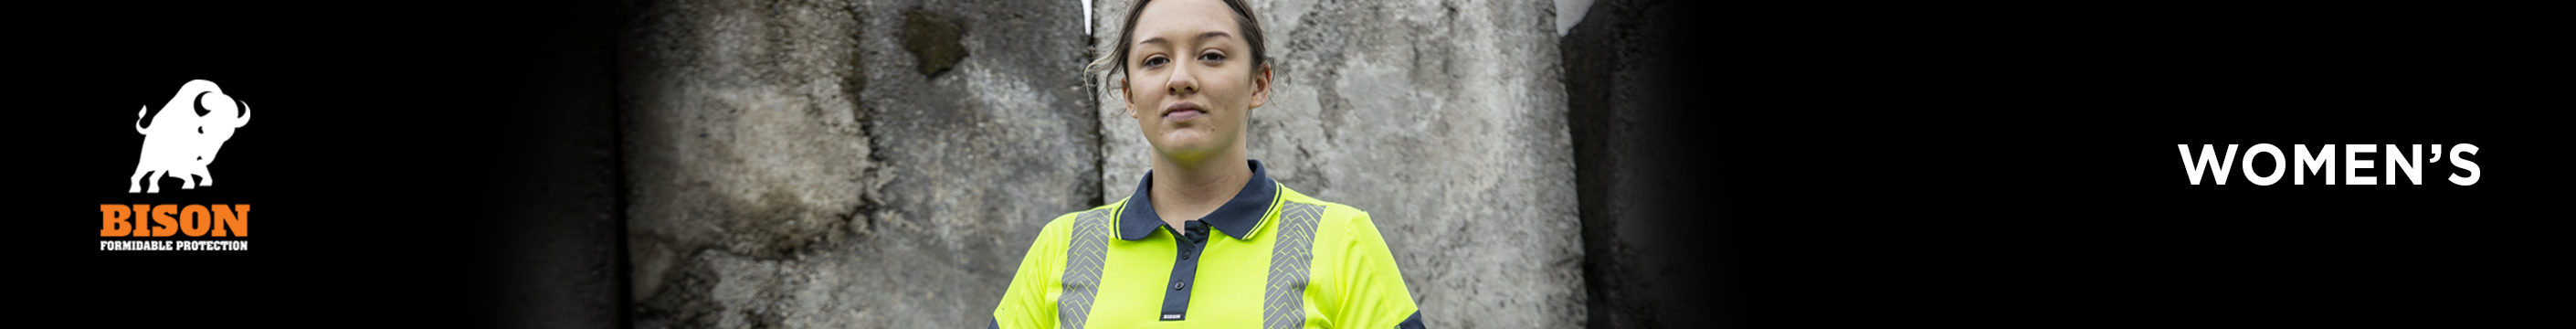 <img alt="Bison Women's Workwear" src="/images/CategoryImages/BISON/Bison_Category banners_Womens-min.jpg?u=1Ye6jR" data-bind="attr: { src: imageUri }">
<h1>WOMEN'S</h1>
<span style="font-size: 14px;">Our women&rsquo;s range of workwear has been designed by NZ Women for NZ Women. Our Product Development team have taken into consideration the female shape, how garments need to move and function day-to-day while not having to dress differently from their male co-workers.<br><br></span>